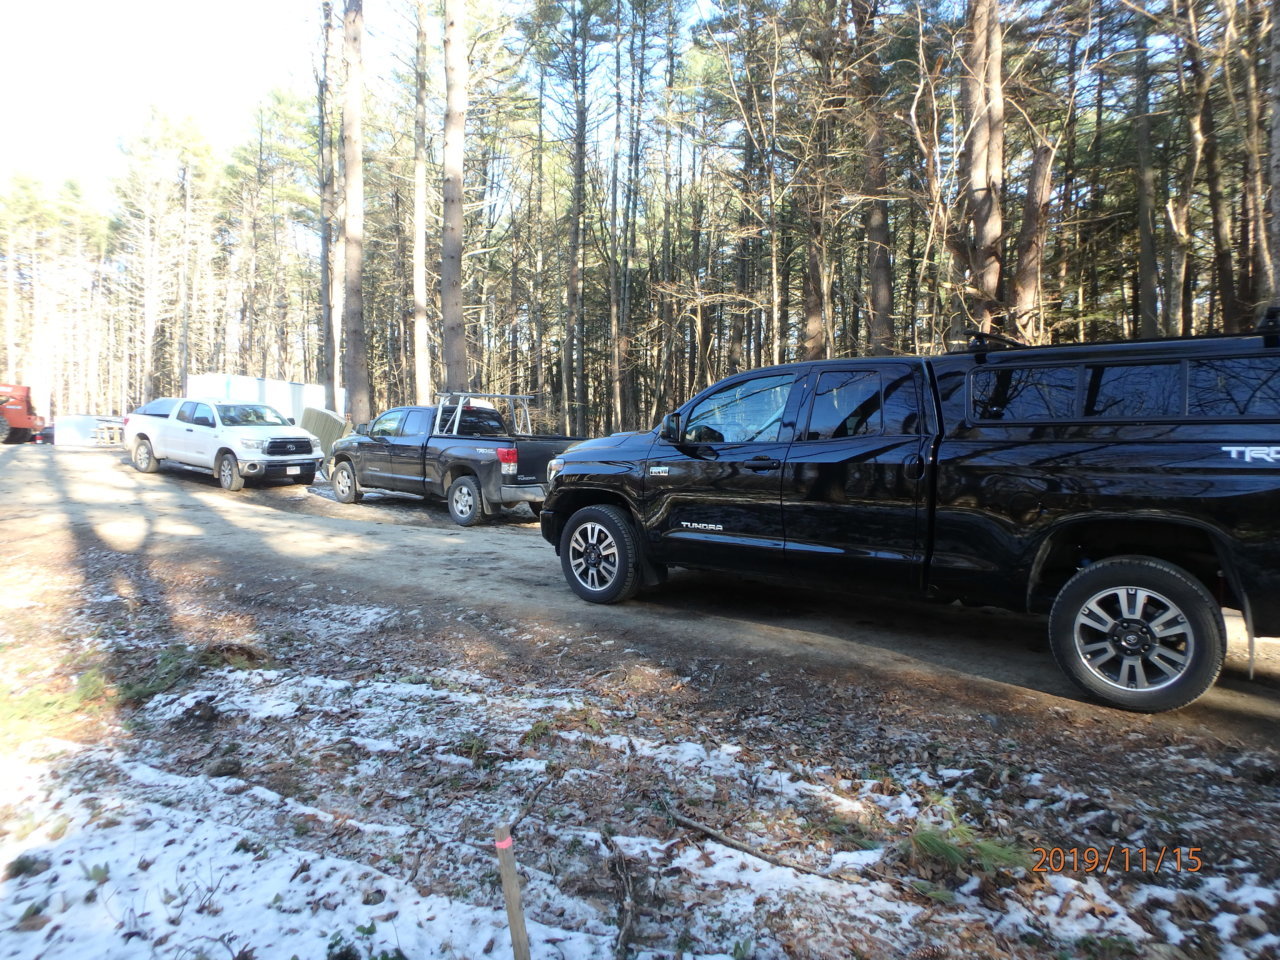 How many Tundras at your workplace/jobsite? | Toyota Tundra Forum